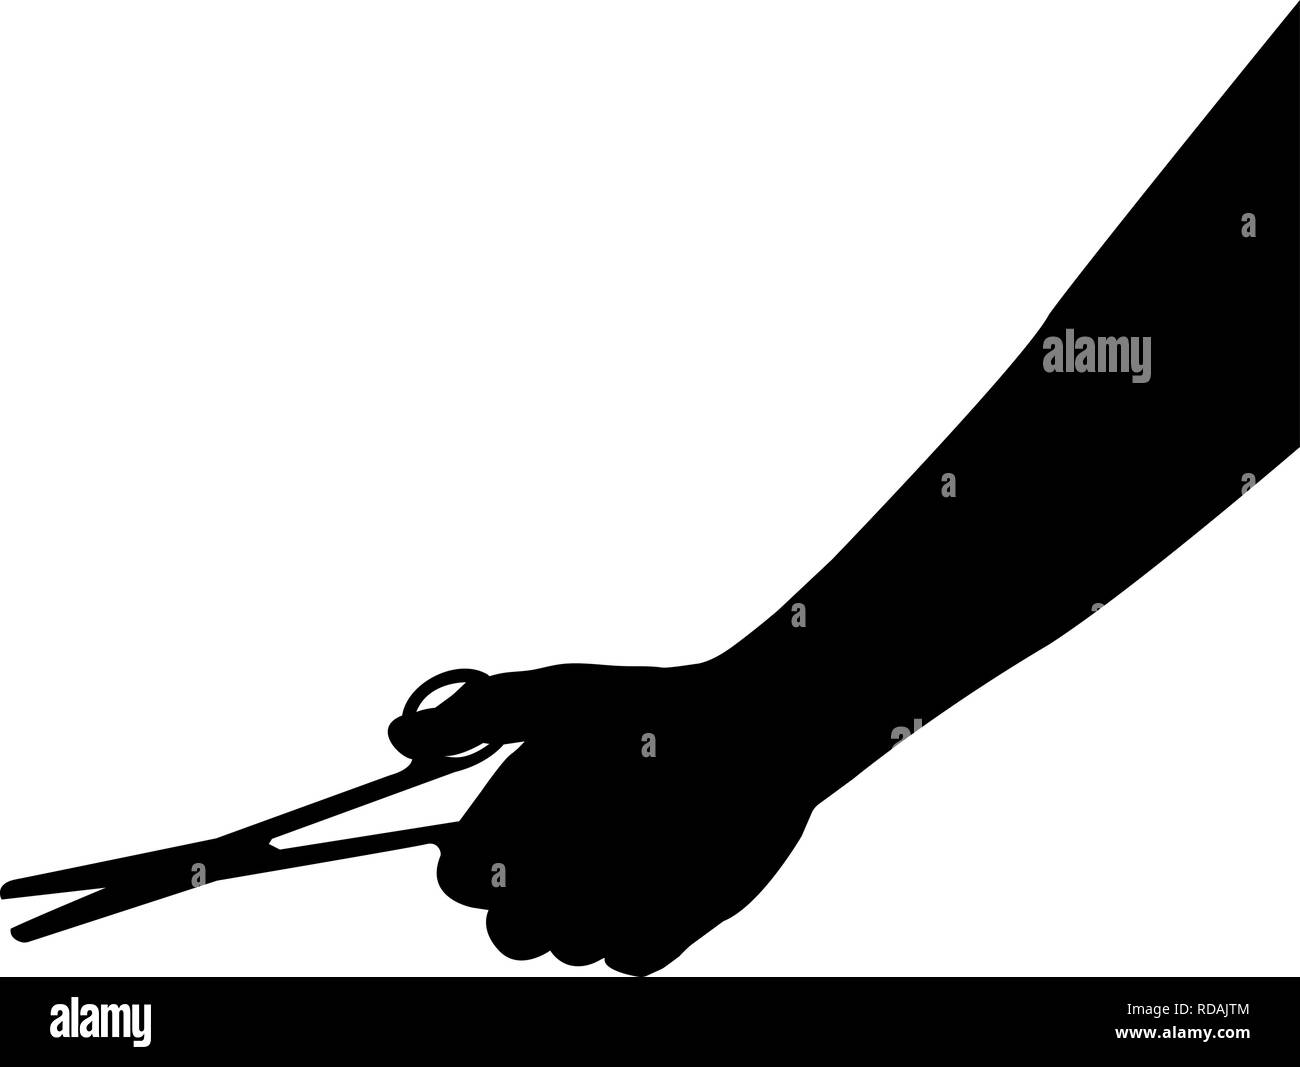 scissors in hand silhouette, vector graphic isolated on white background, Stock Vector